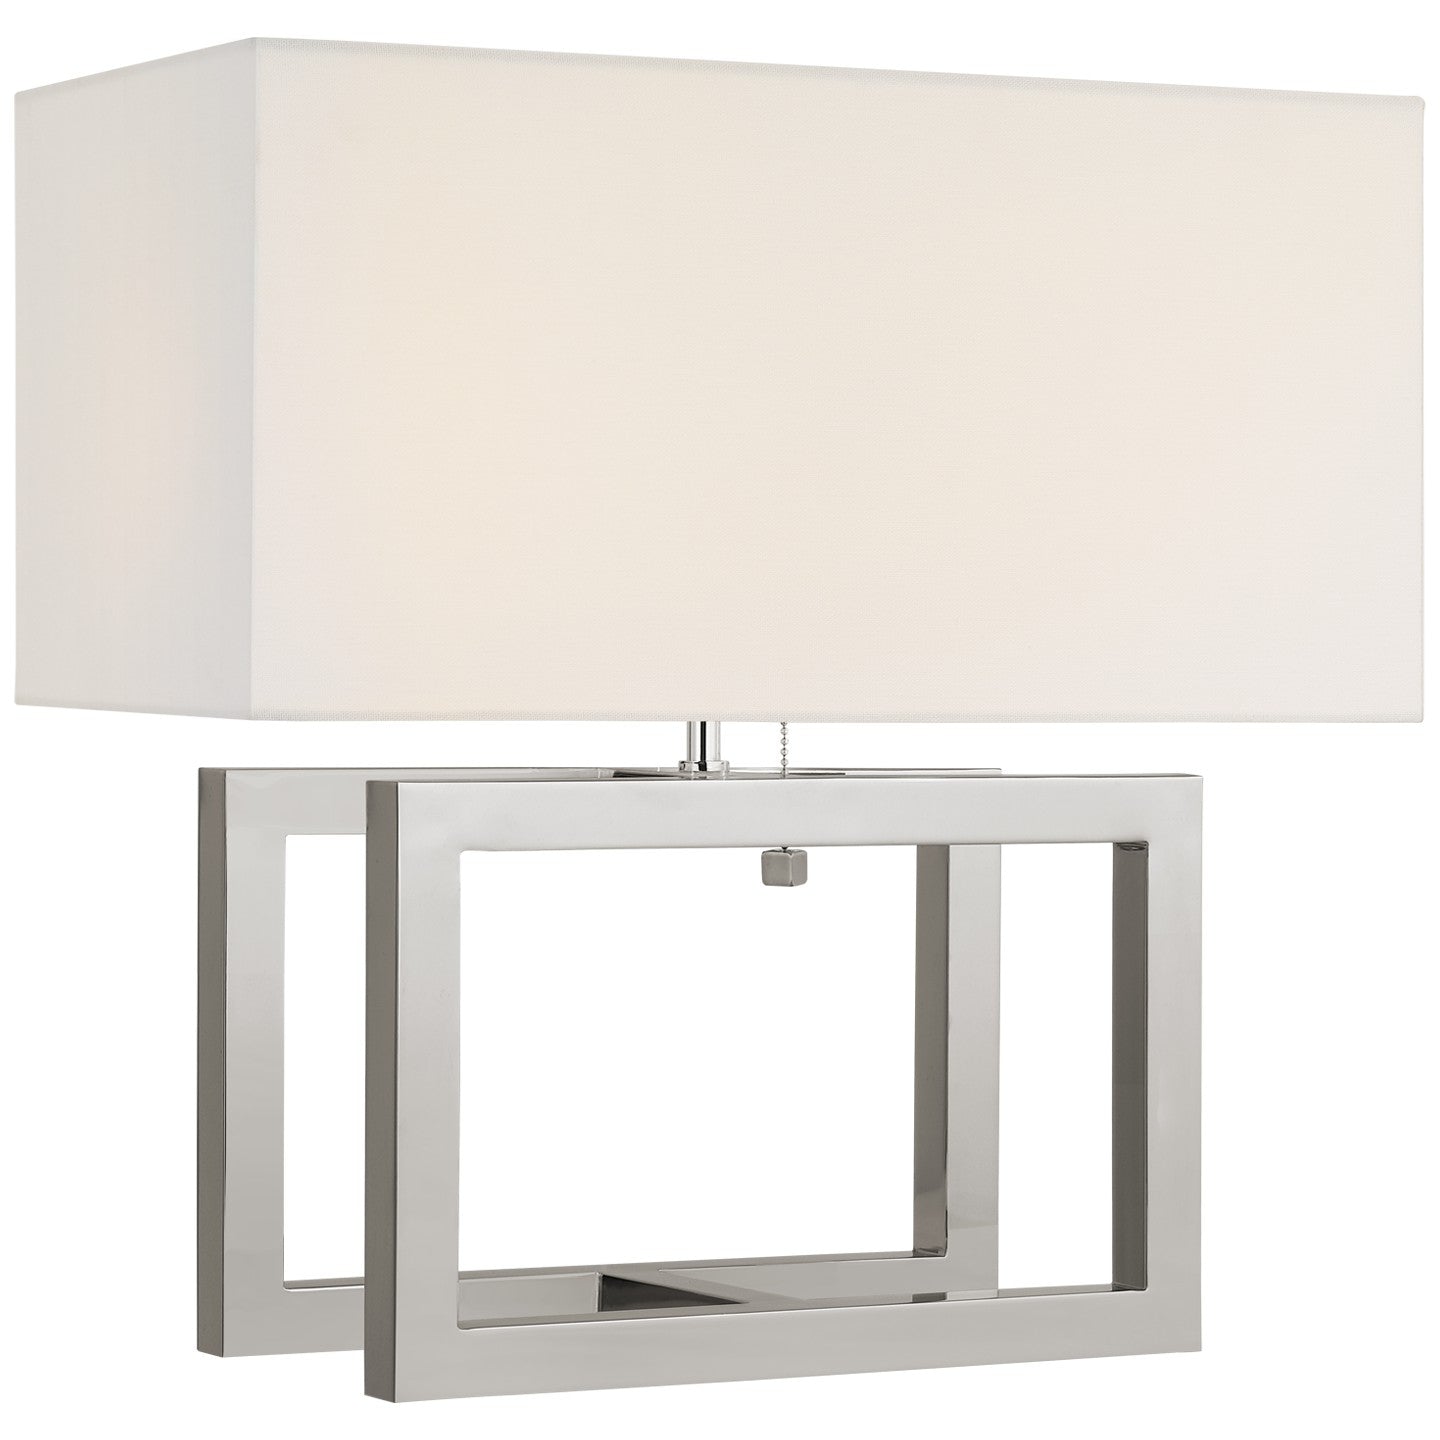 Load image into Gallery viewer, Visual Comfort Signature - PCD 3012PN-L - LED Table Lamp - Galerie - Polished Nickel
